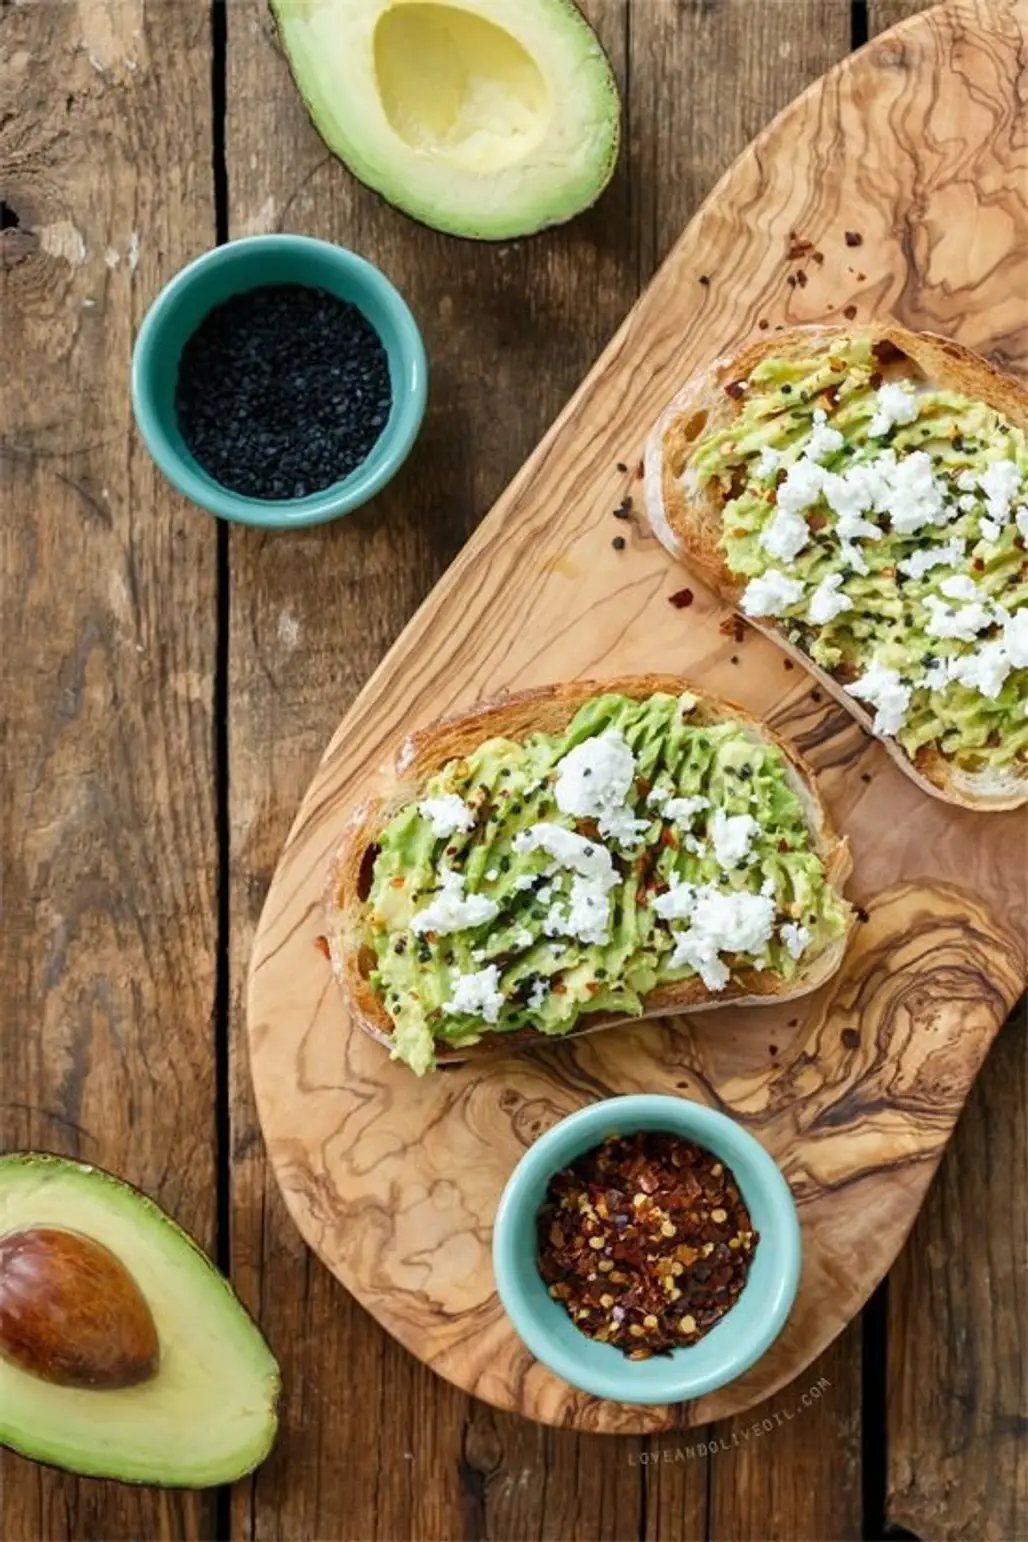 Avocado and Goat Cheese